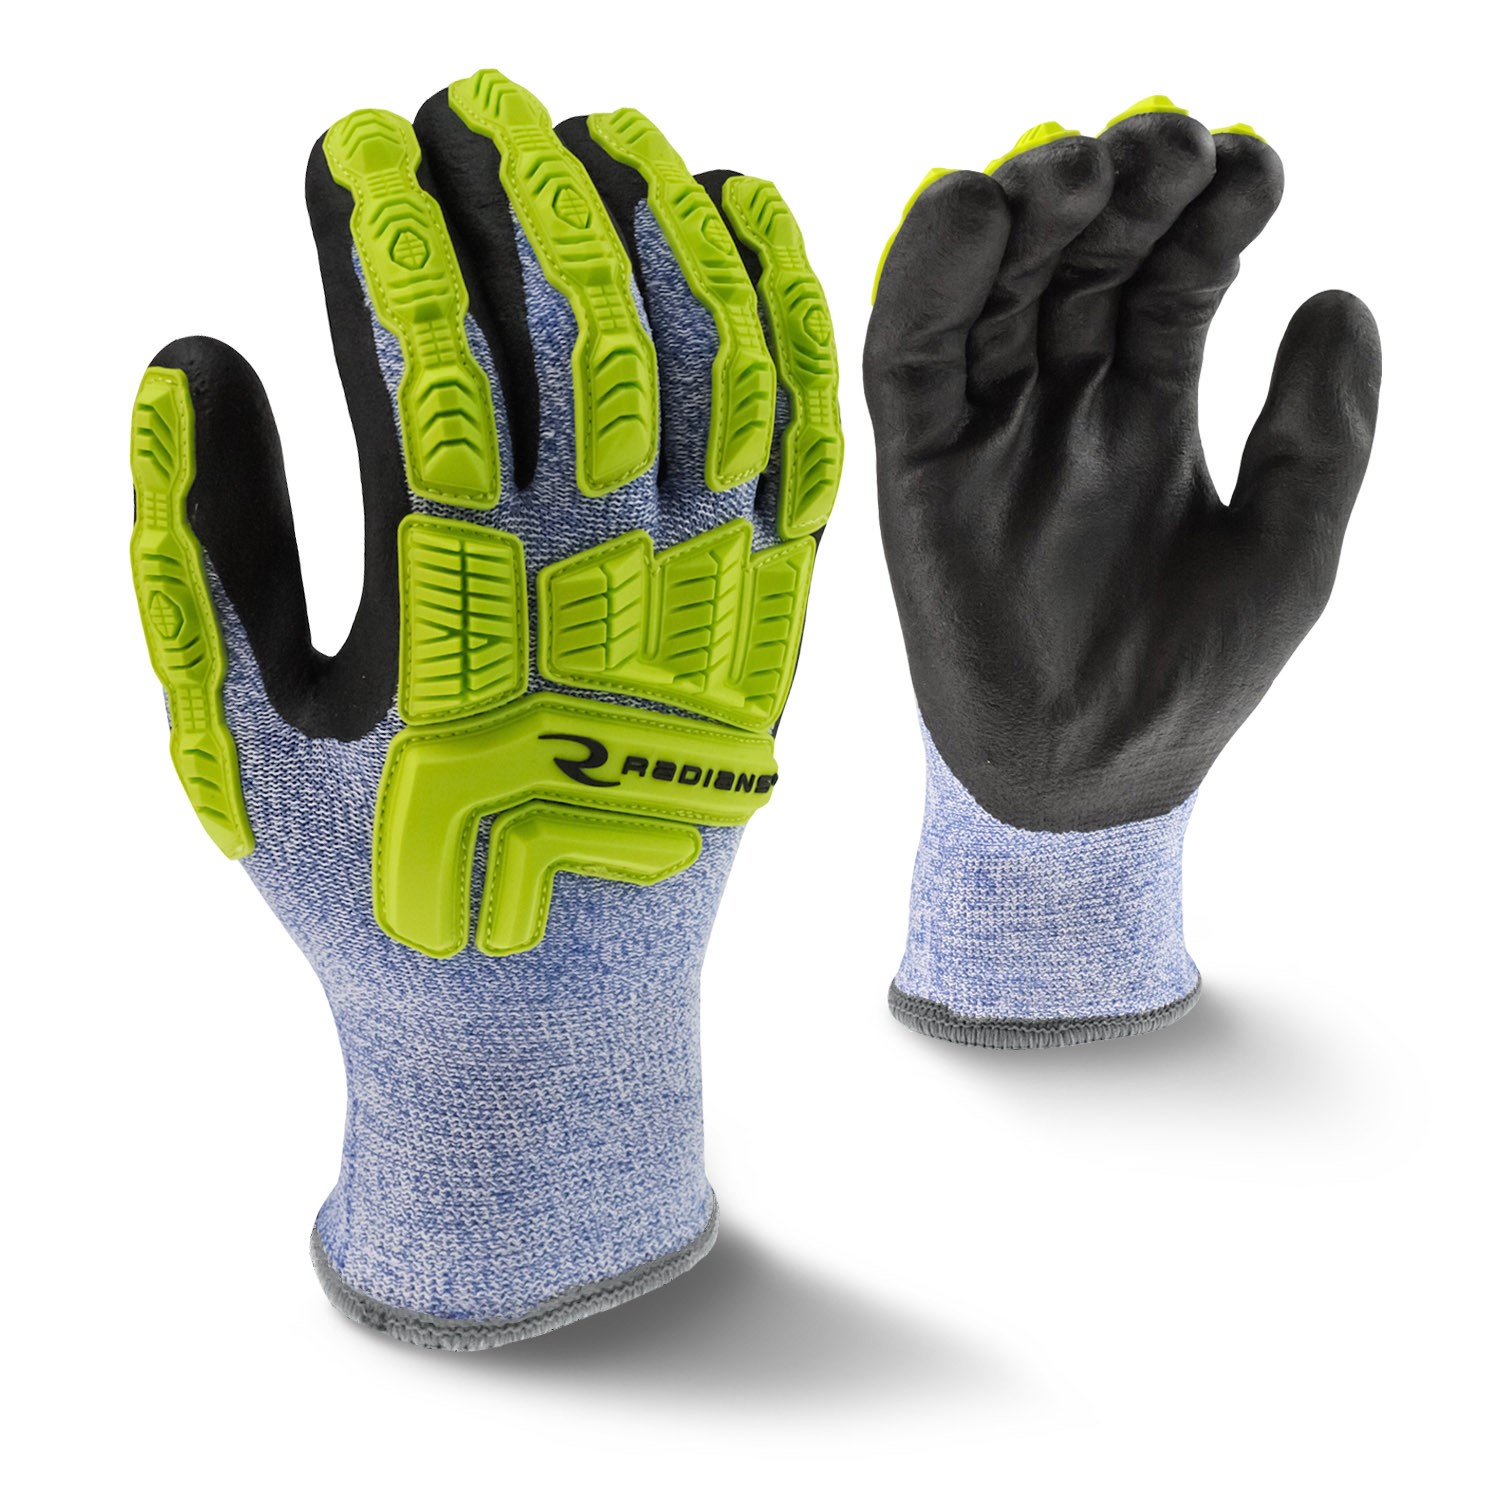 Radians Cut Protection Cold Weather Coated Glove (#RWG604)